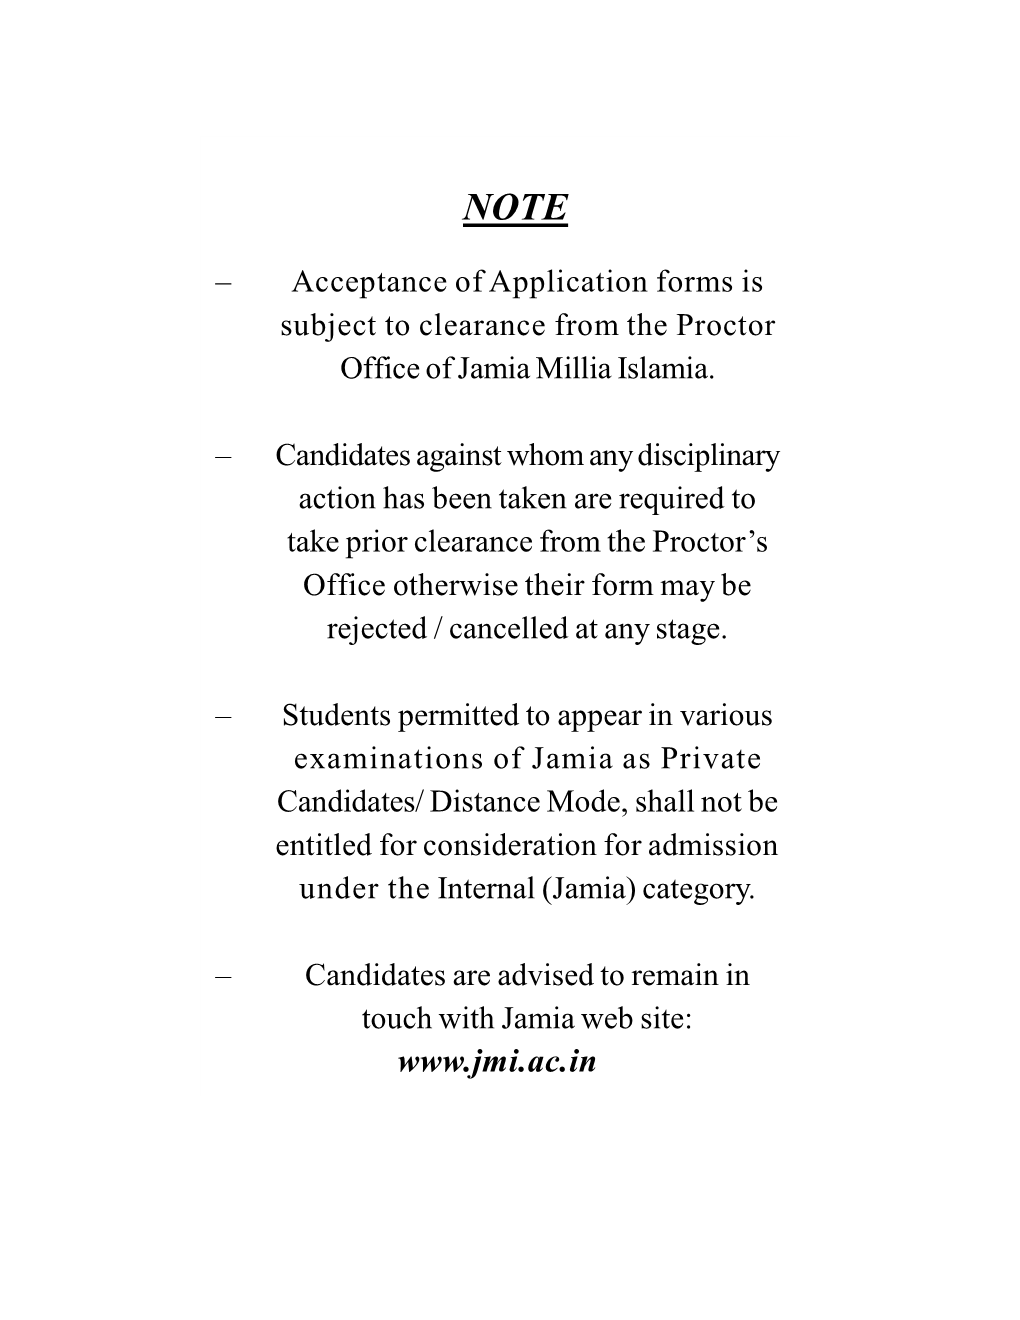 Guidelines for Private Candidates